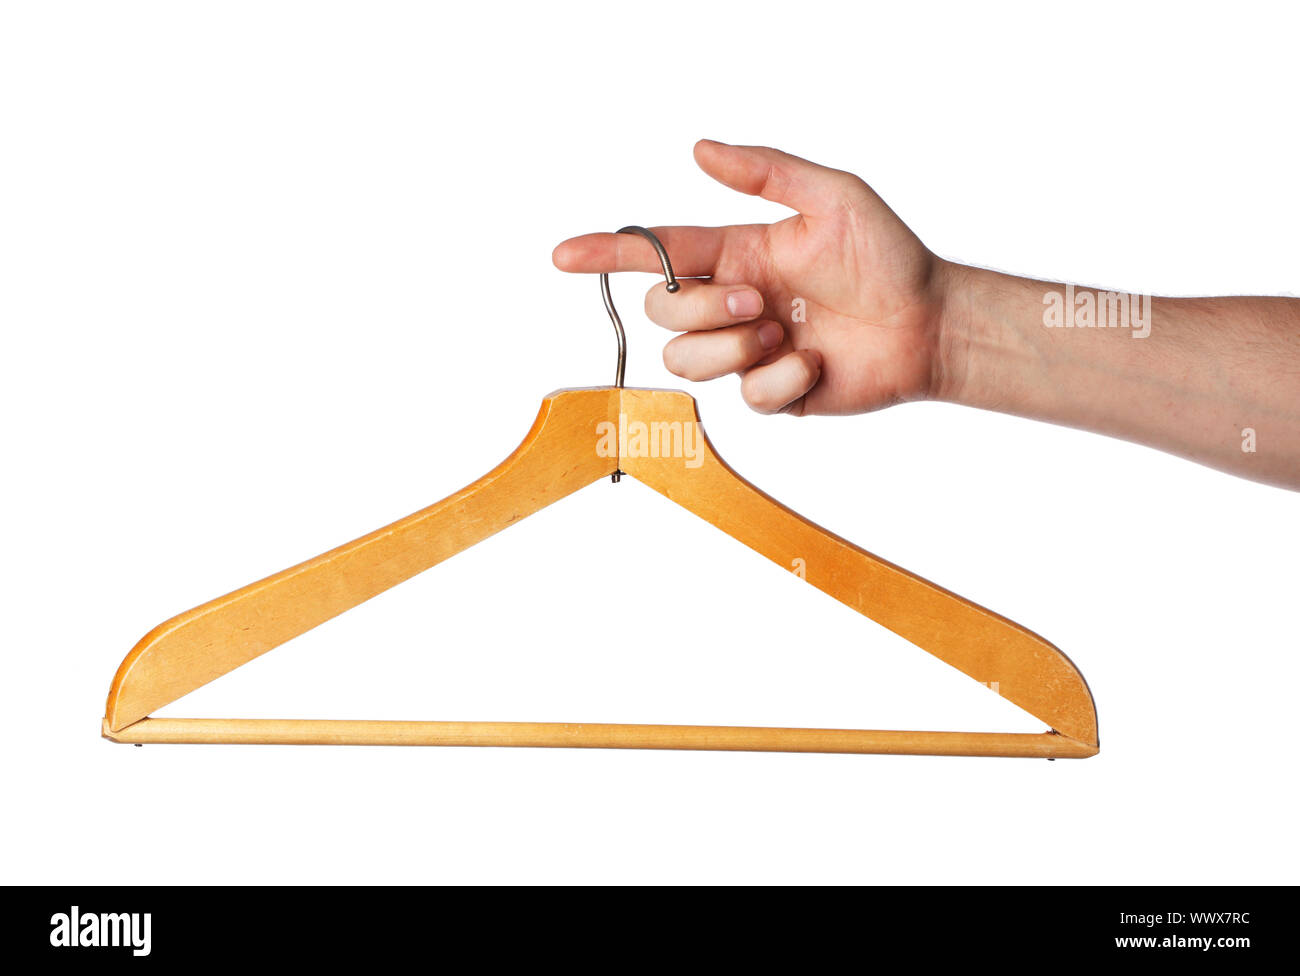 Old wooden clothes hanger hanging from a finger Stock Photo